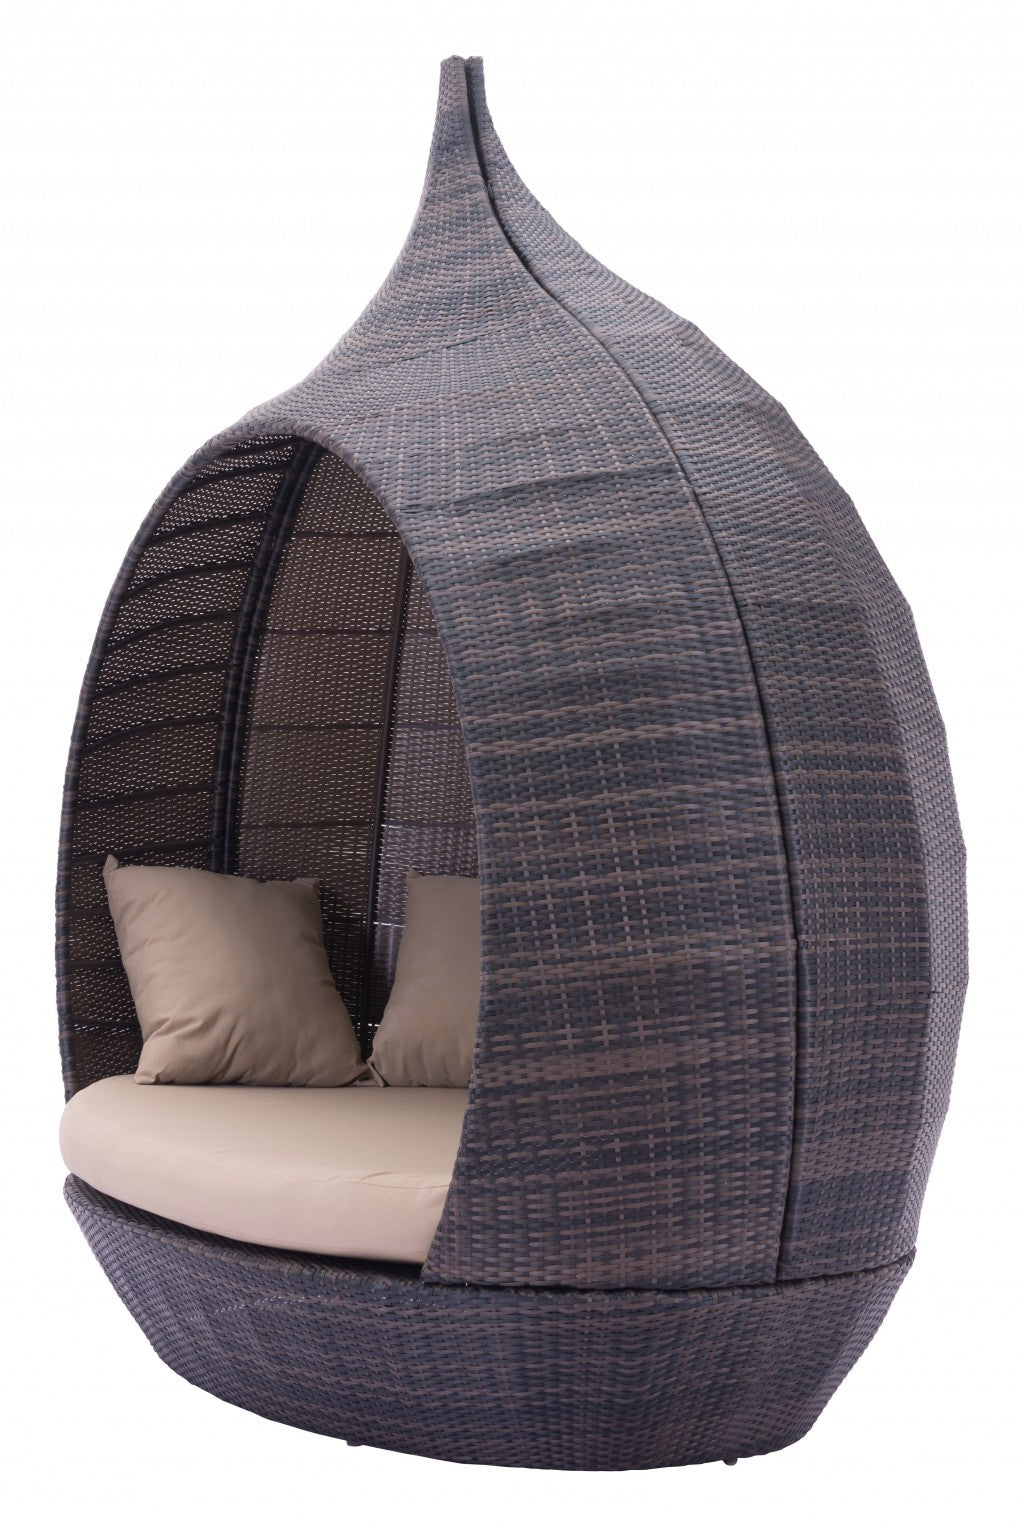 Teardrop Shaped Brown and Beige Daybed